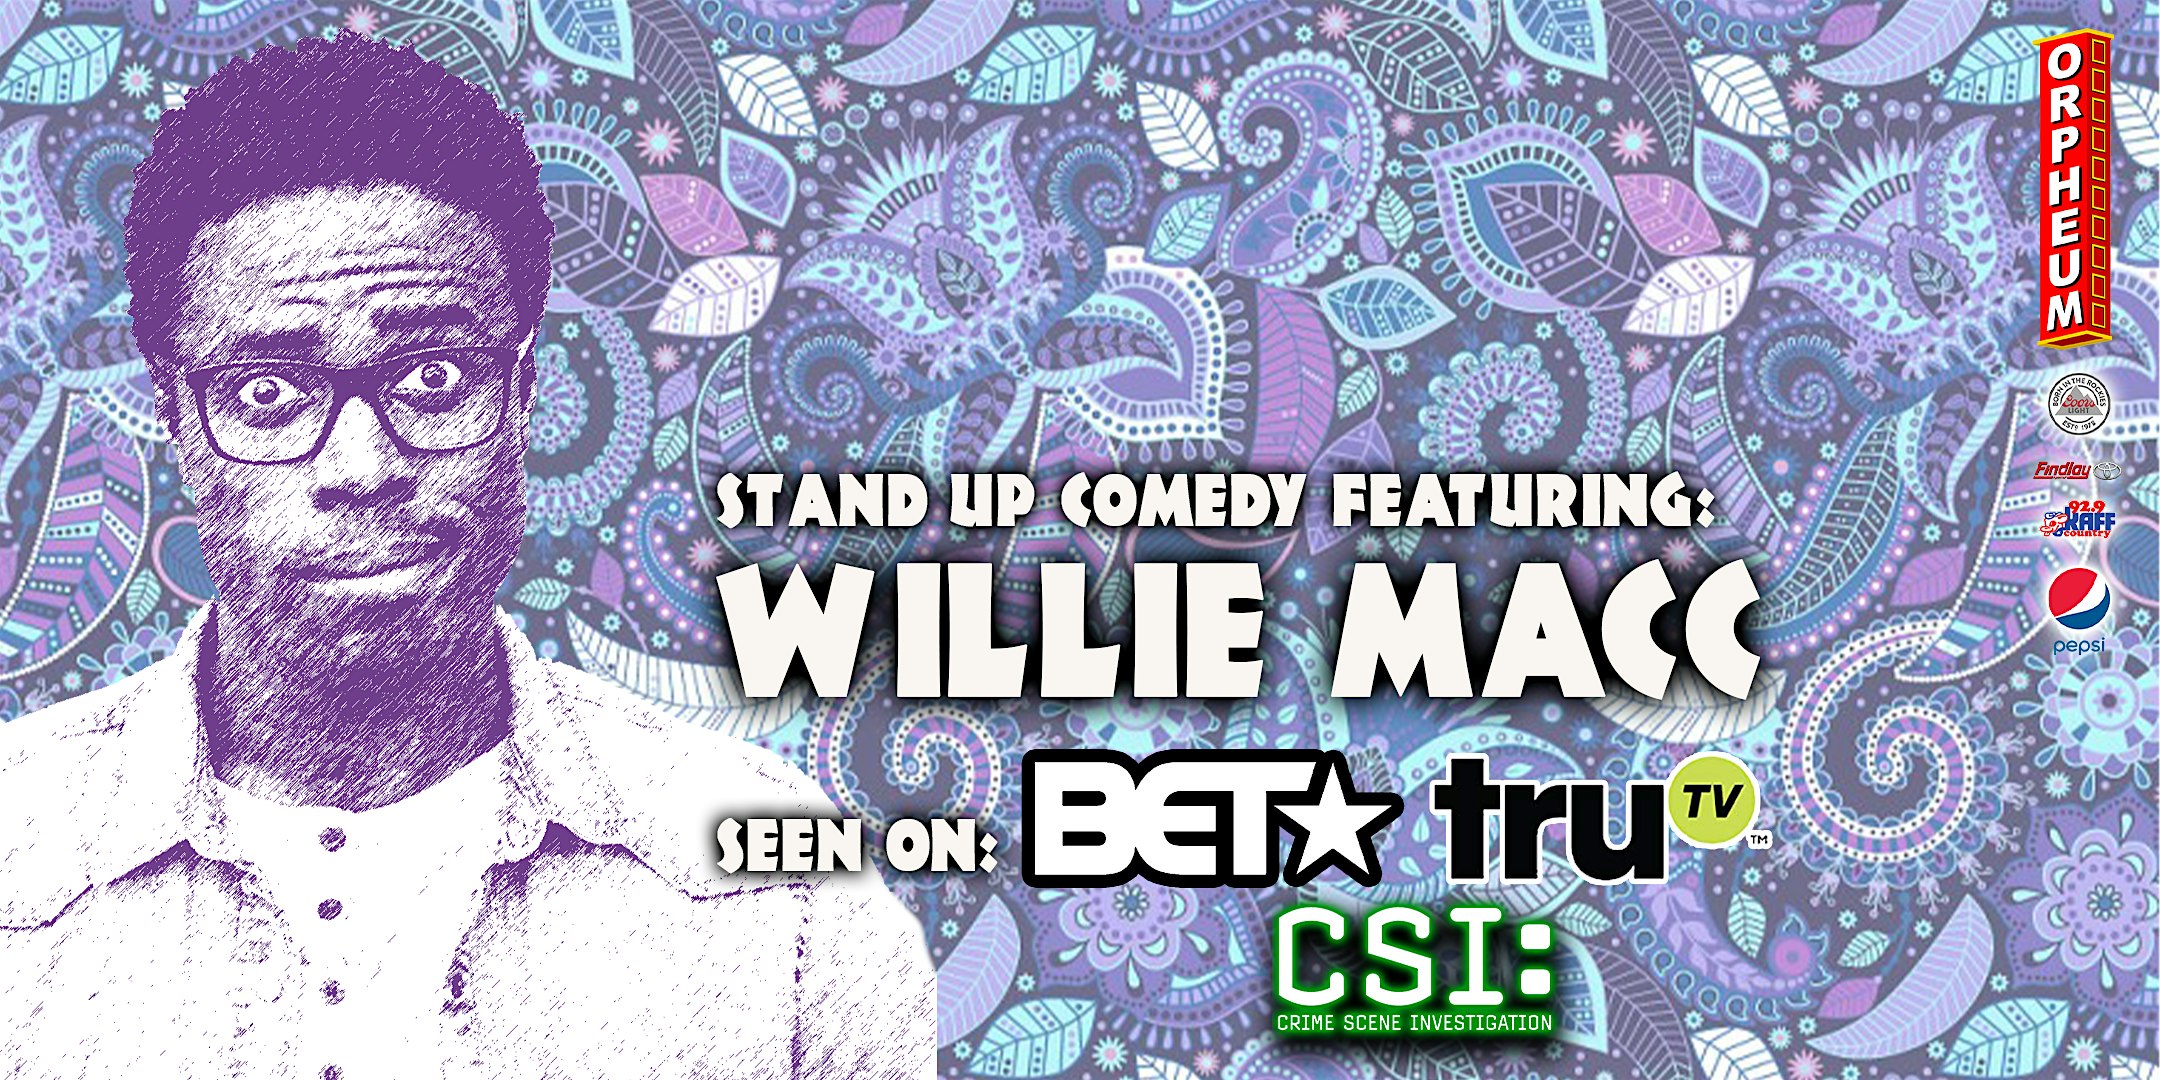 Stand Up Comedy Featuring Willie Macc Tickets The Orpheum